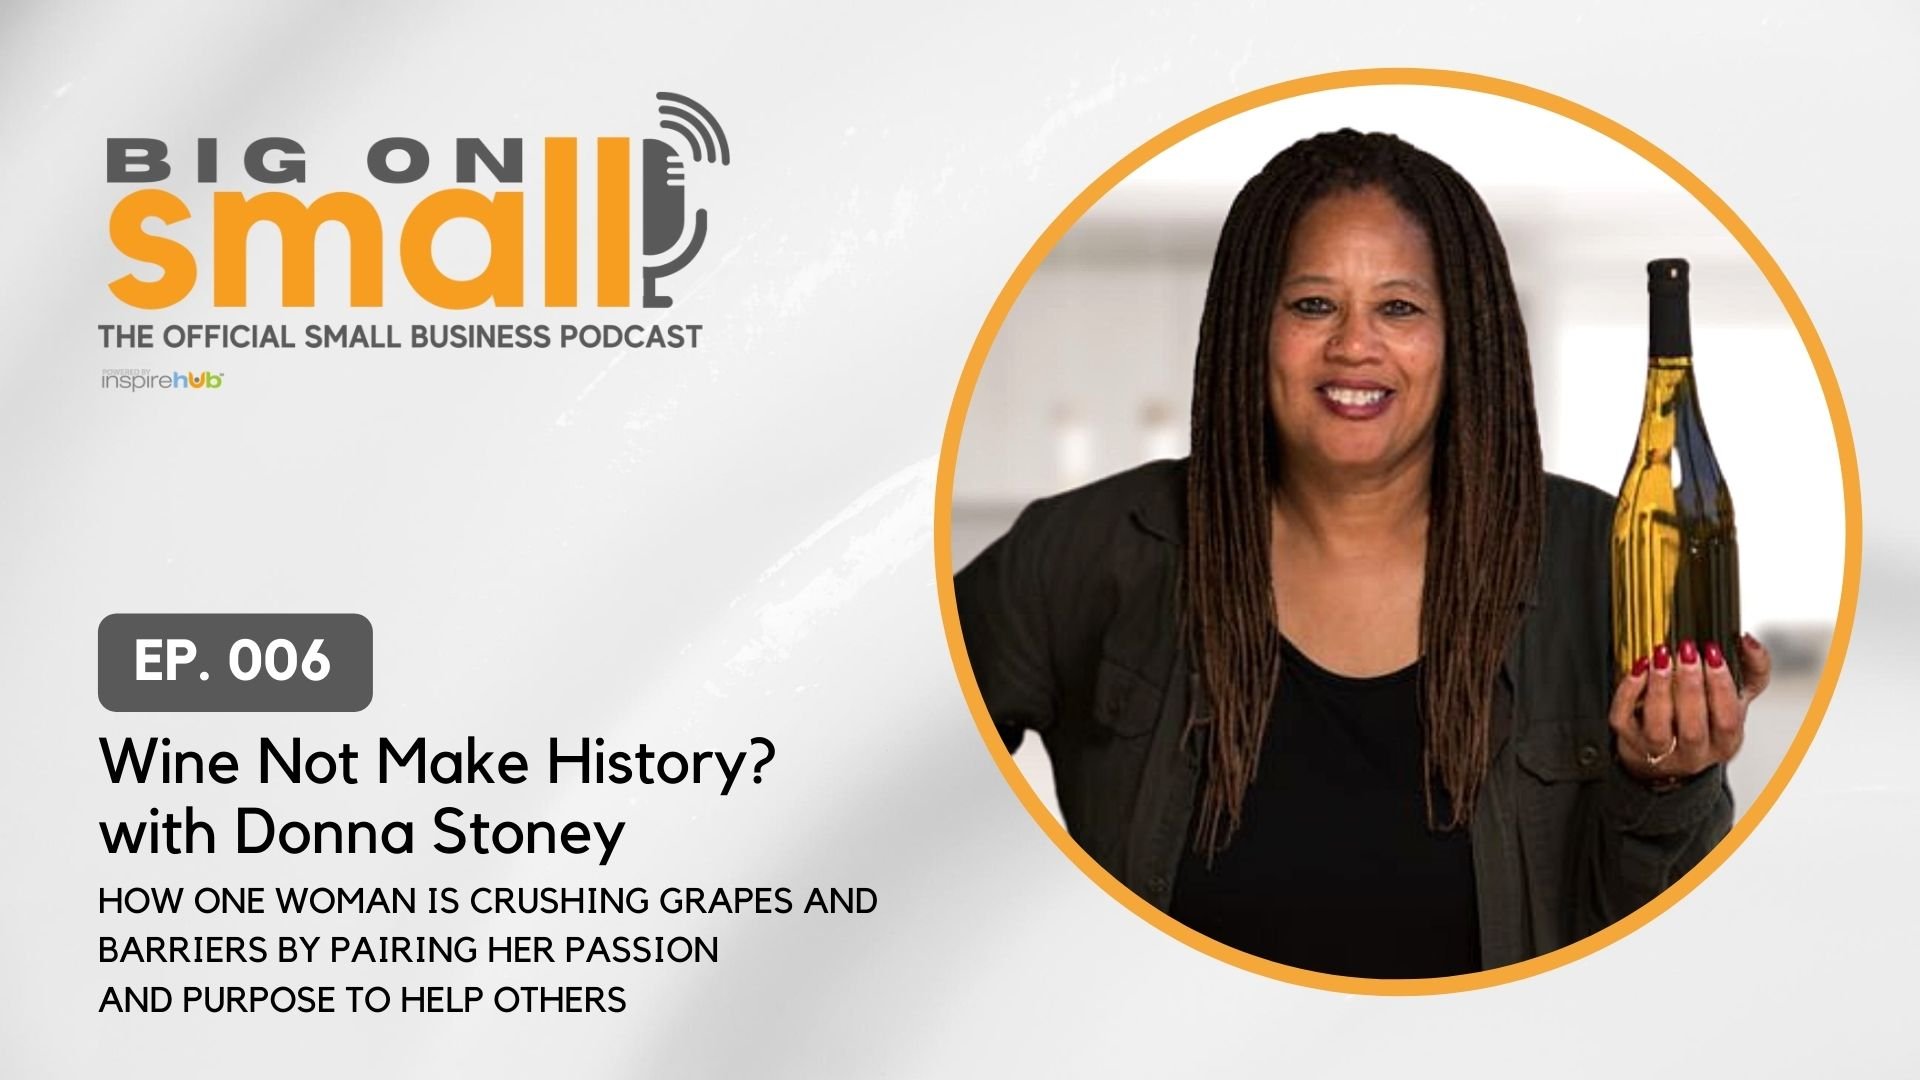 Big on Small Podcast Episode 6: Wine Not Make History? With Donna Stoney